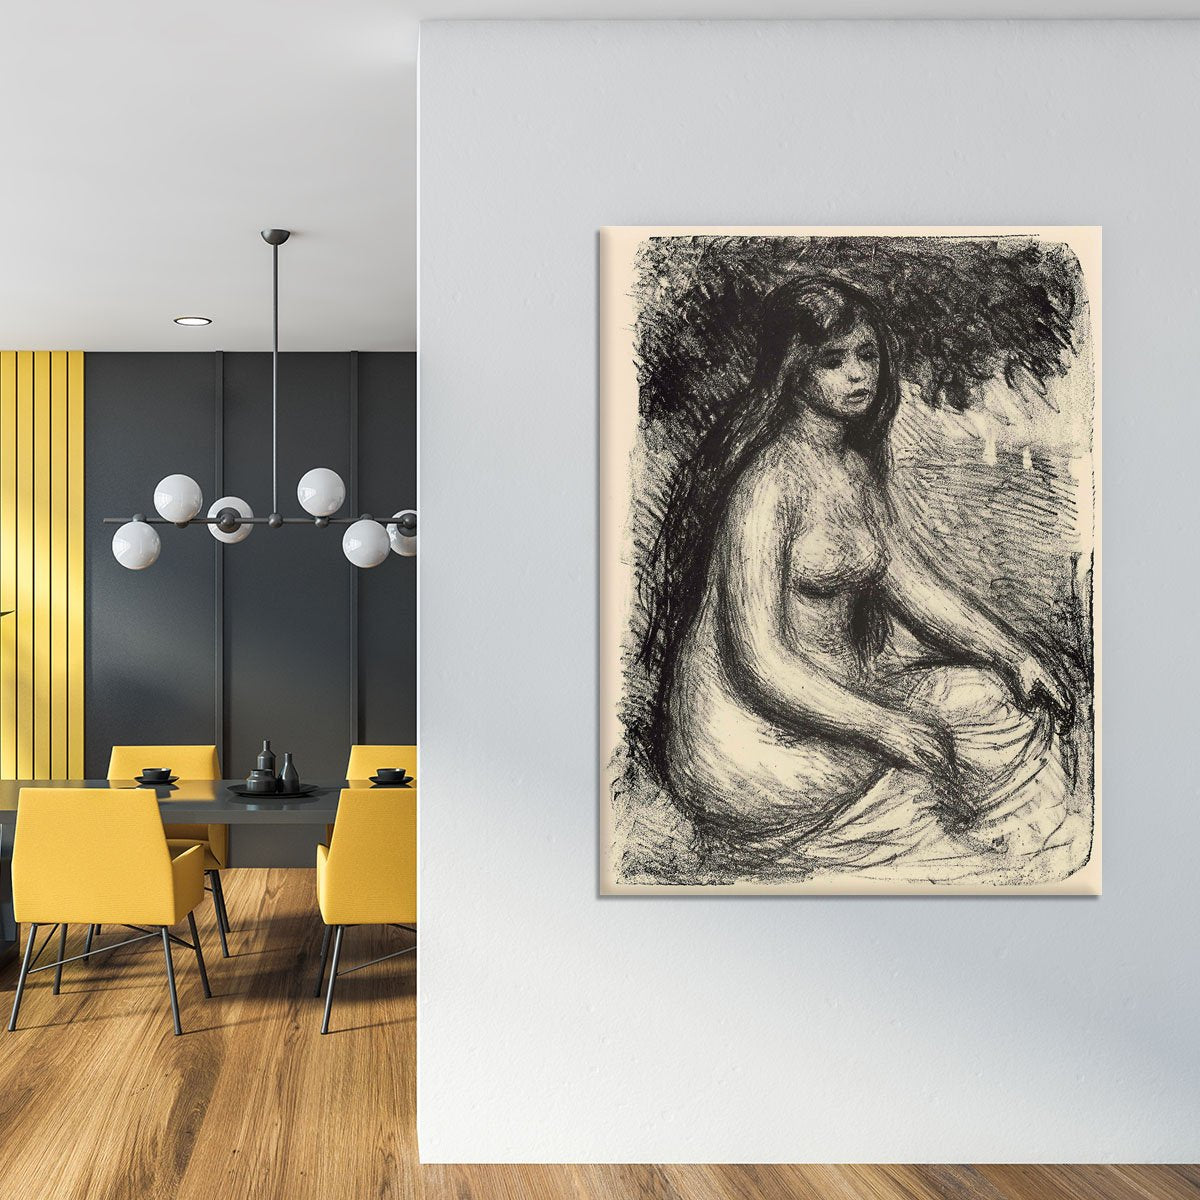 Bather 3 by Renoir Canvas Print or Poster